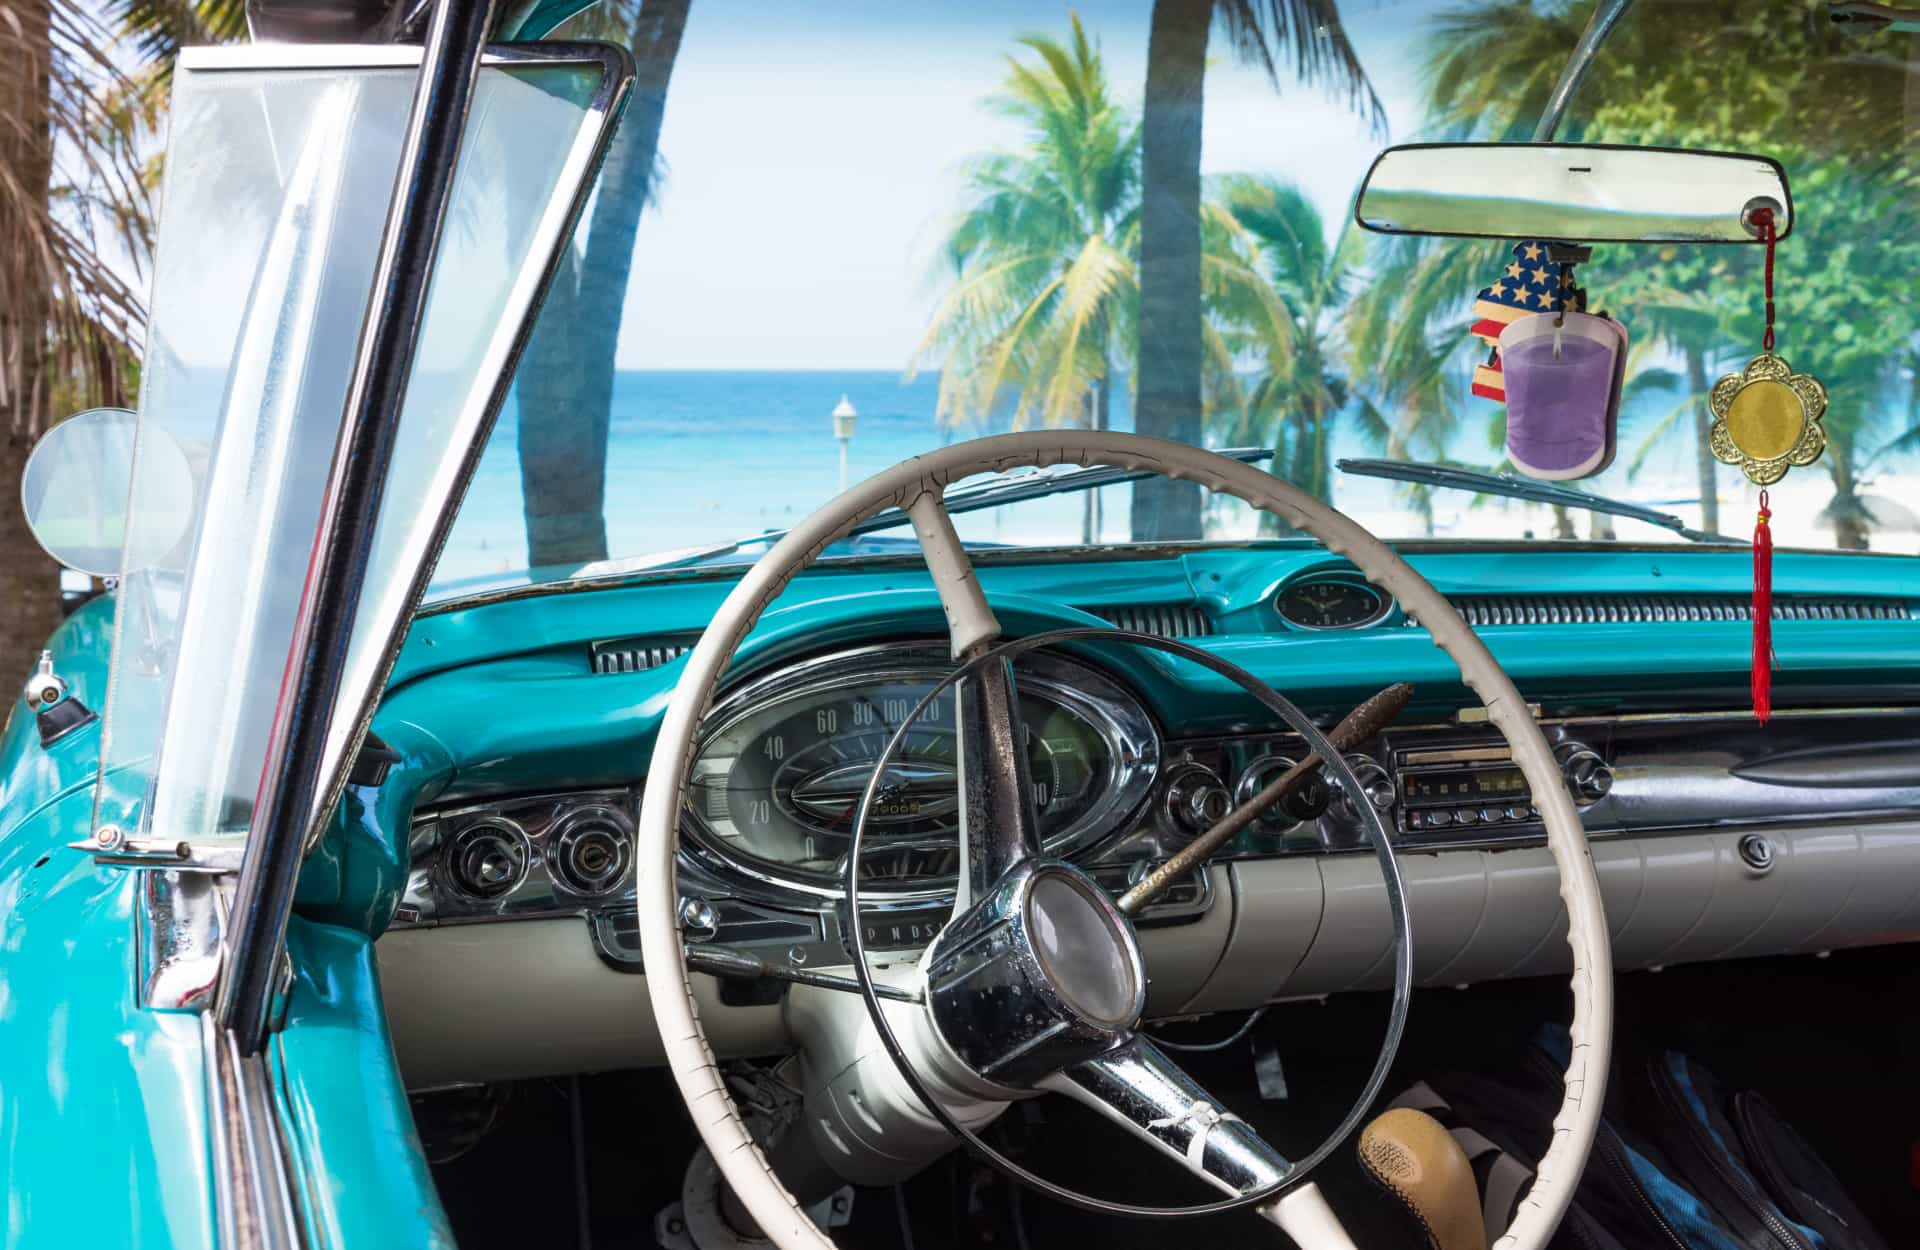 This includes the cars' interior and the classic steering wheels.